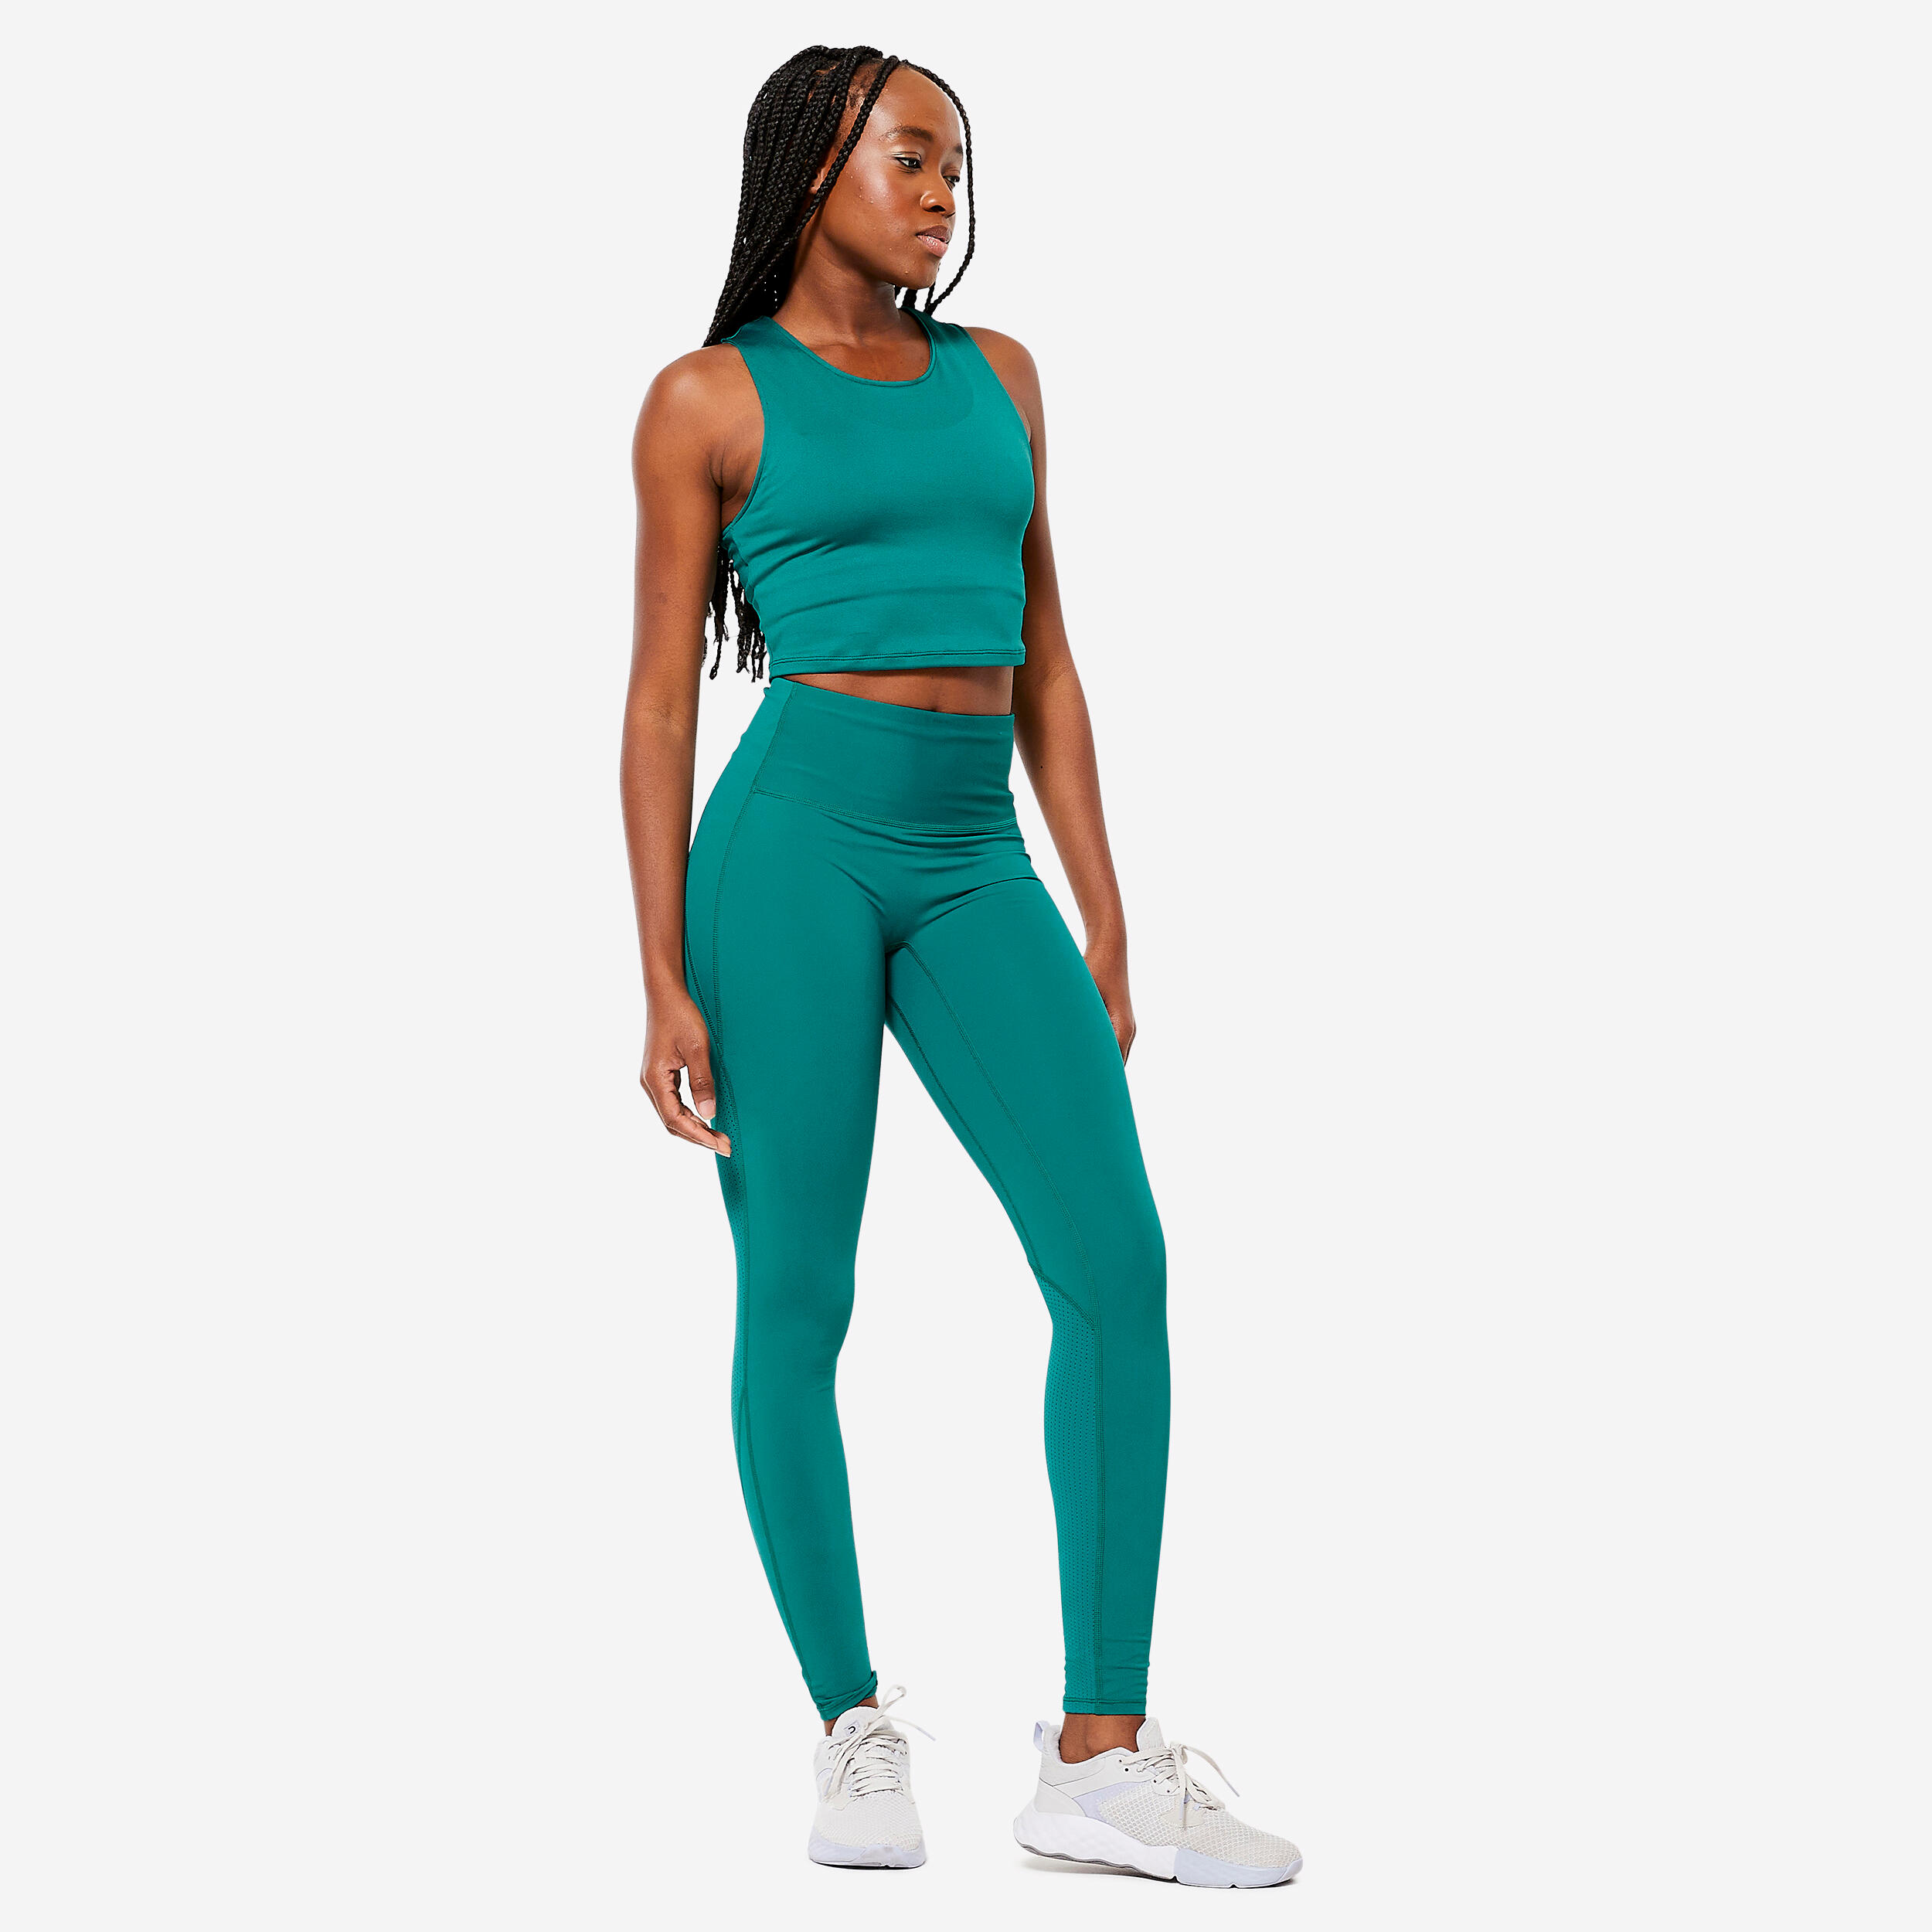 Women's Cardio Fitness Cropped Tank Top - Green 2/6